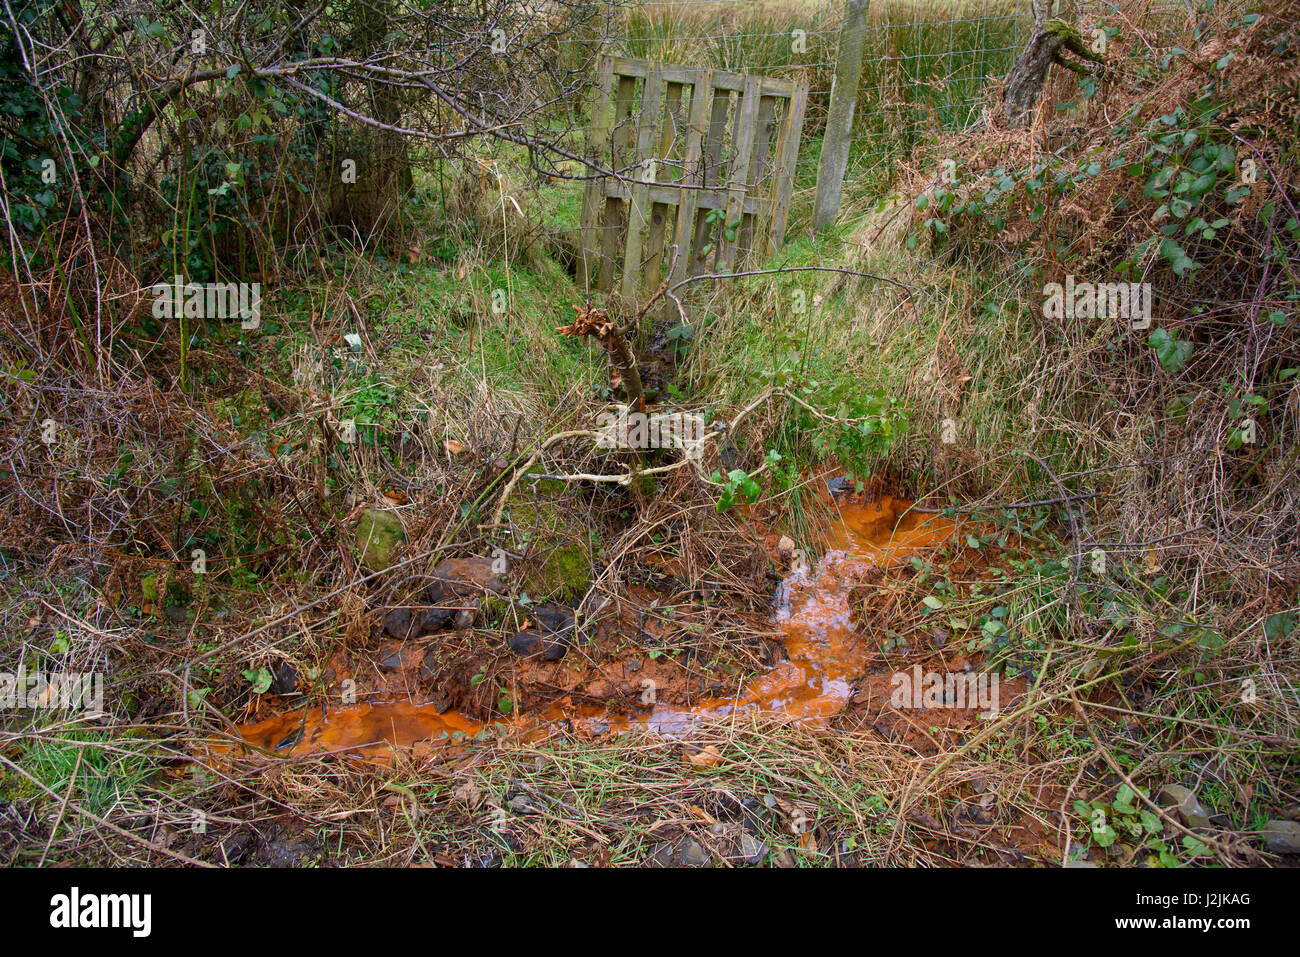 Orange slime seeping from a field, Chipping, Lancashire. The orange slime and fluff is produced by a group of bacteria that use iron as an energy sour Stock Photo